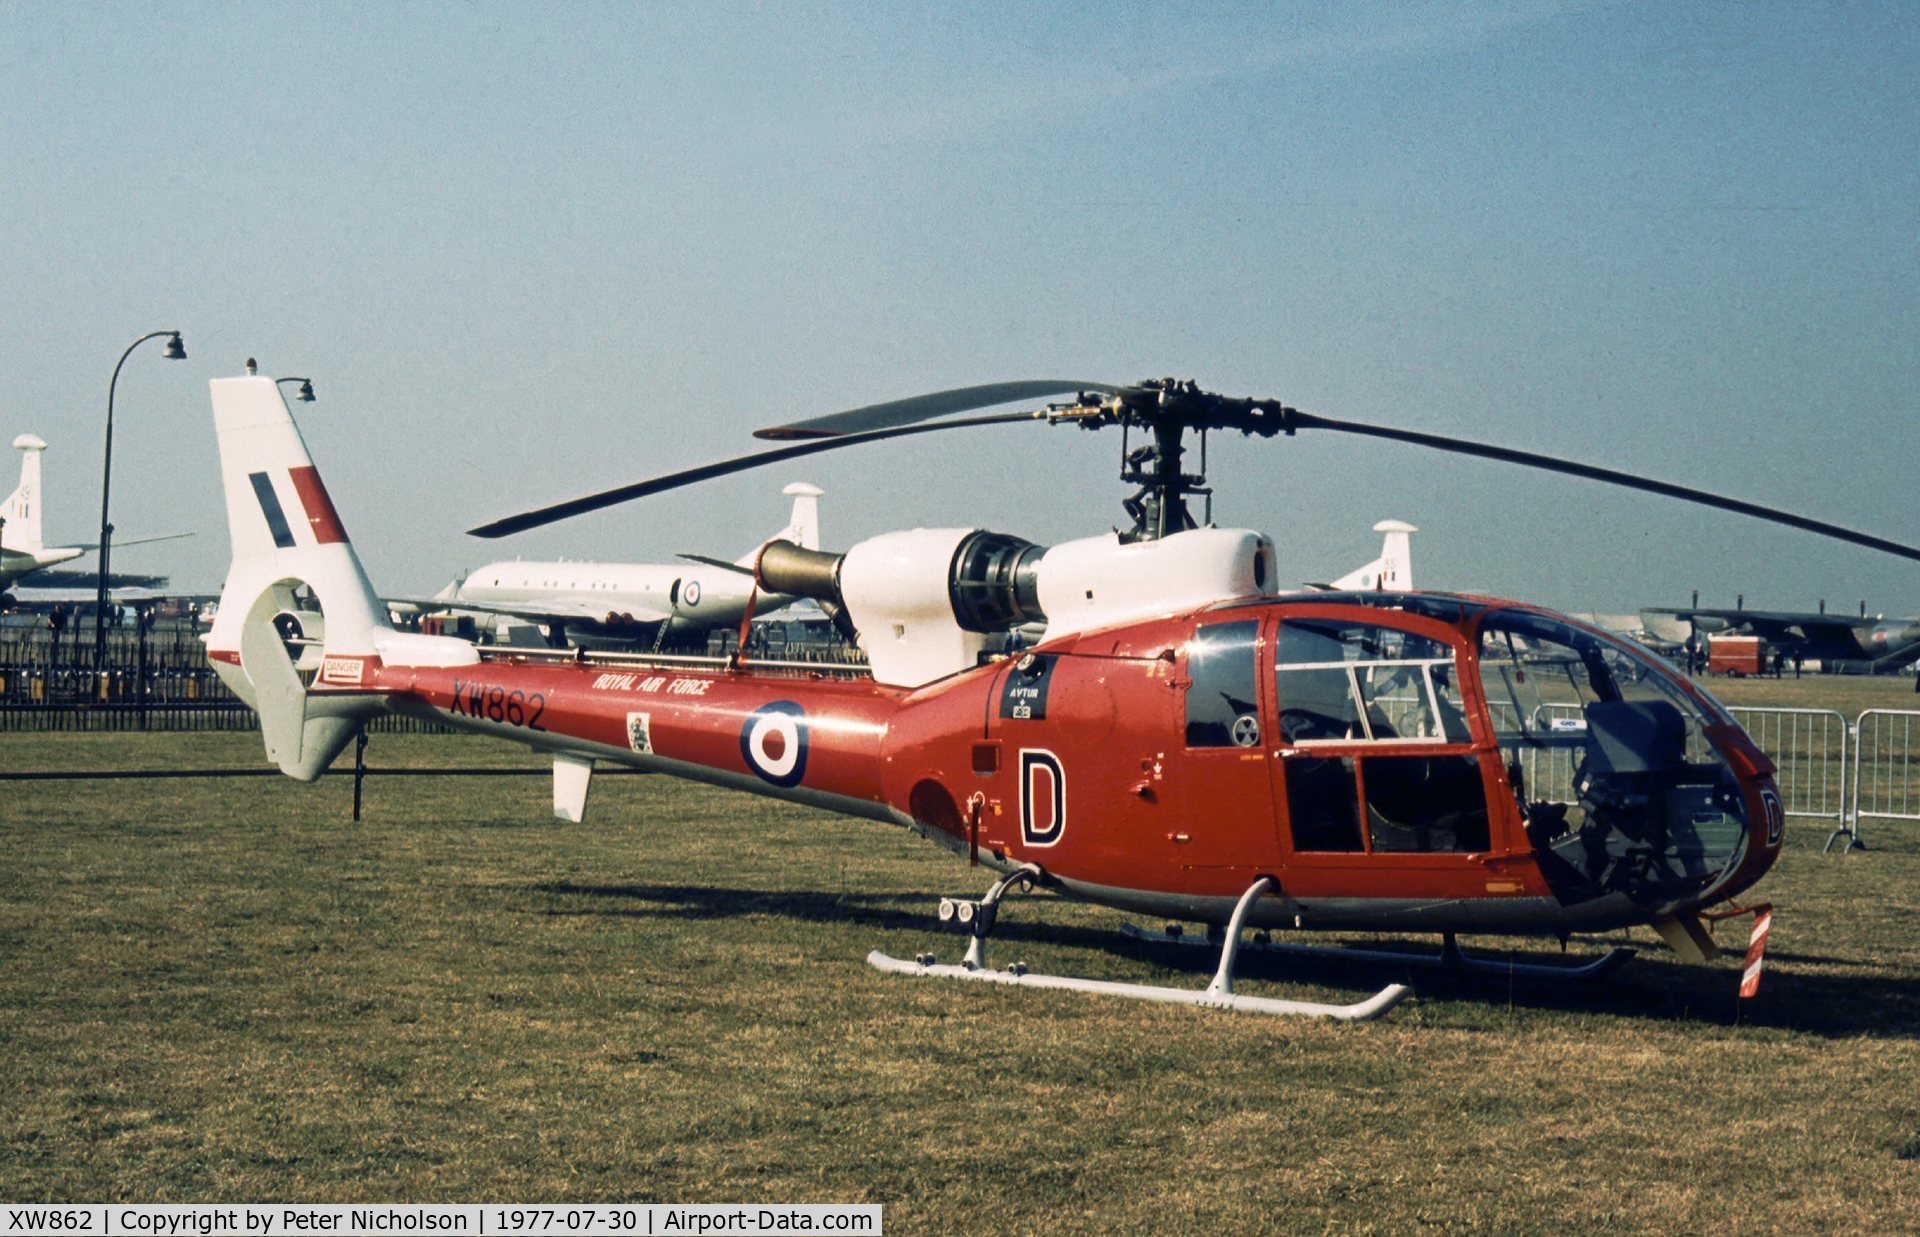 XW862, 1973 Westland SA-341D Gazelle HT3 C/N WA1104, Gazelle HT.3 of the Central Flying School on display at the 1977 Royal Review at RAF Finningley.